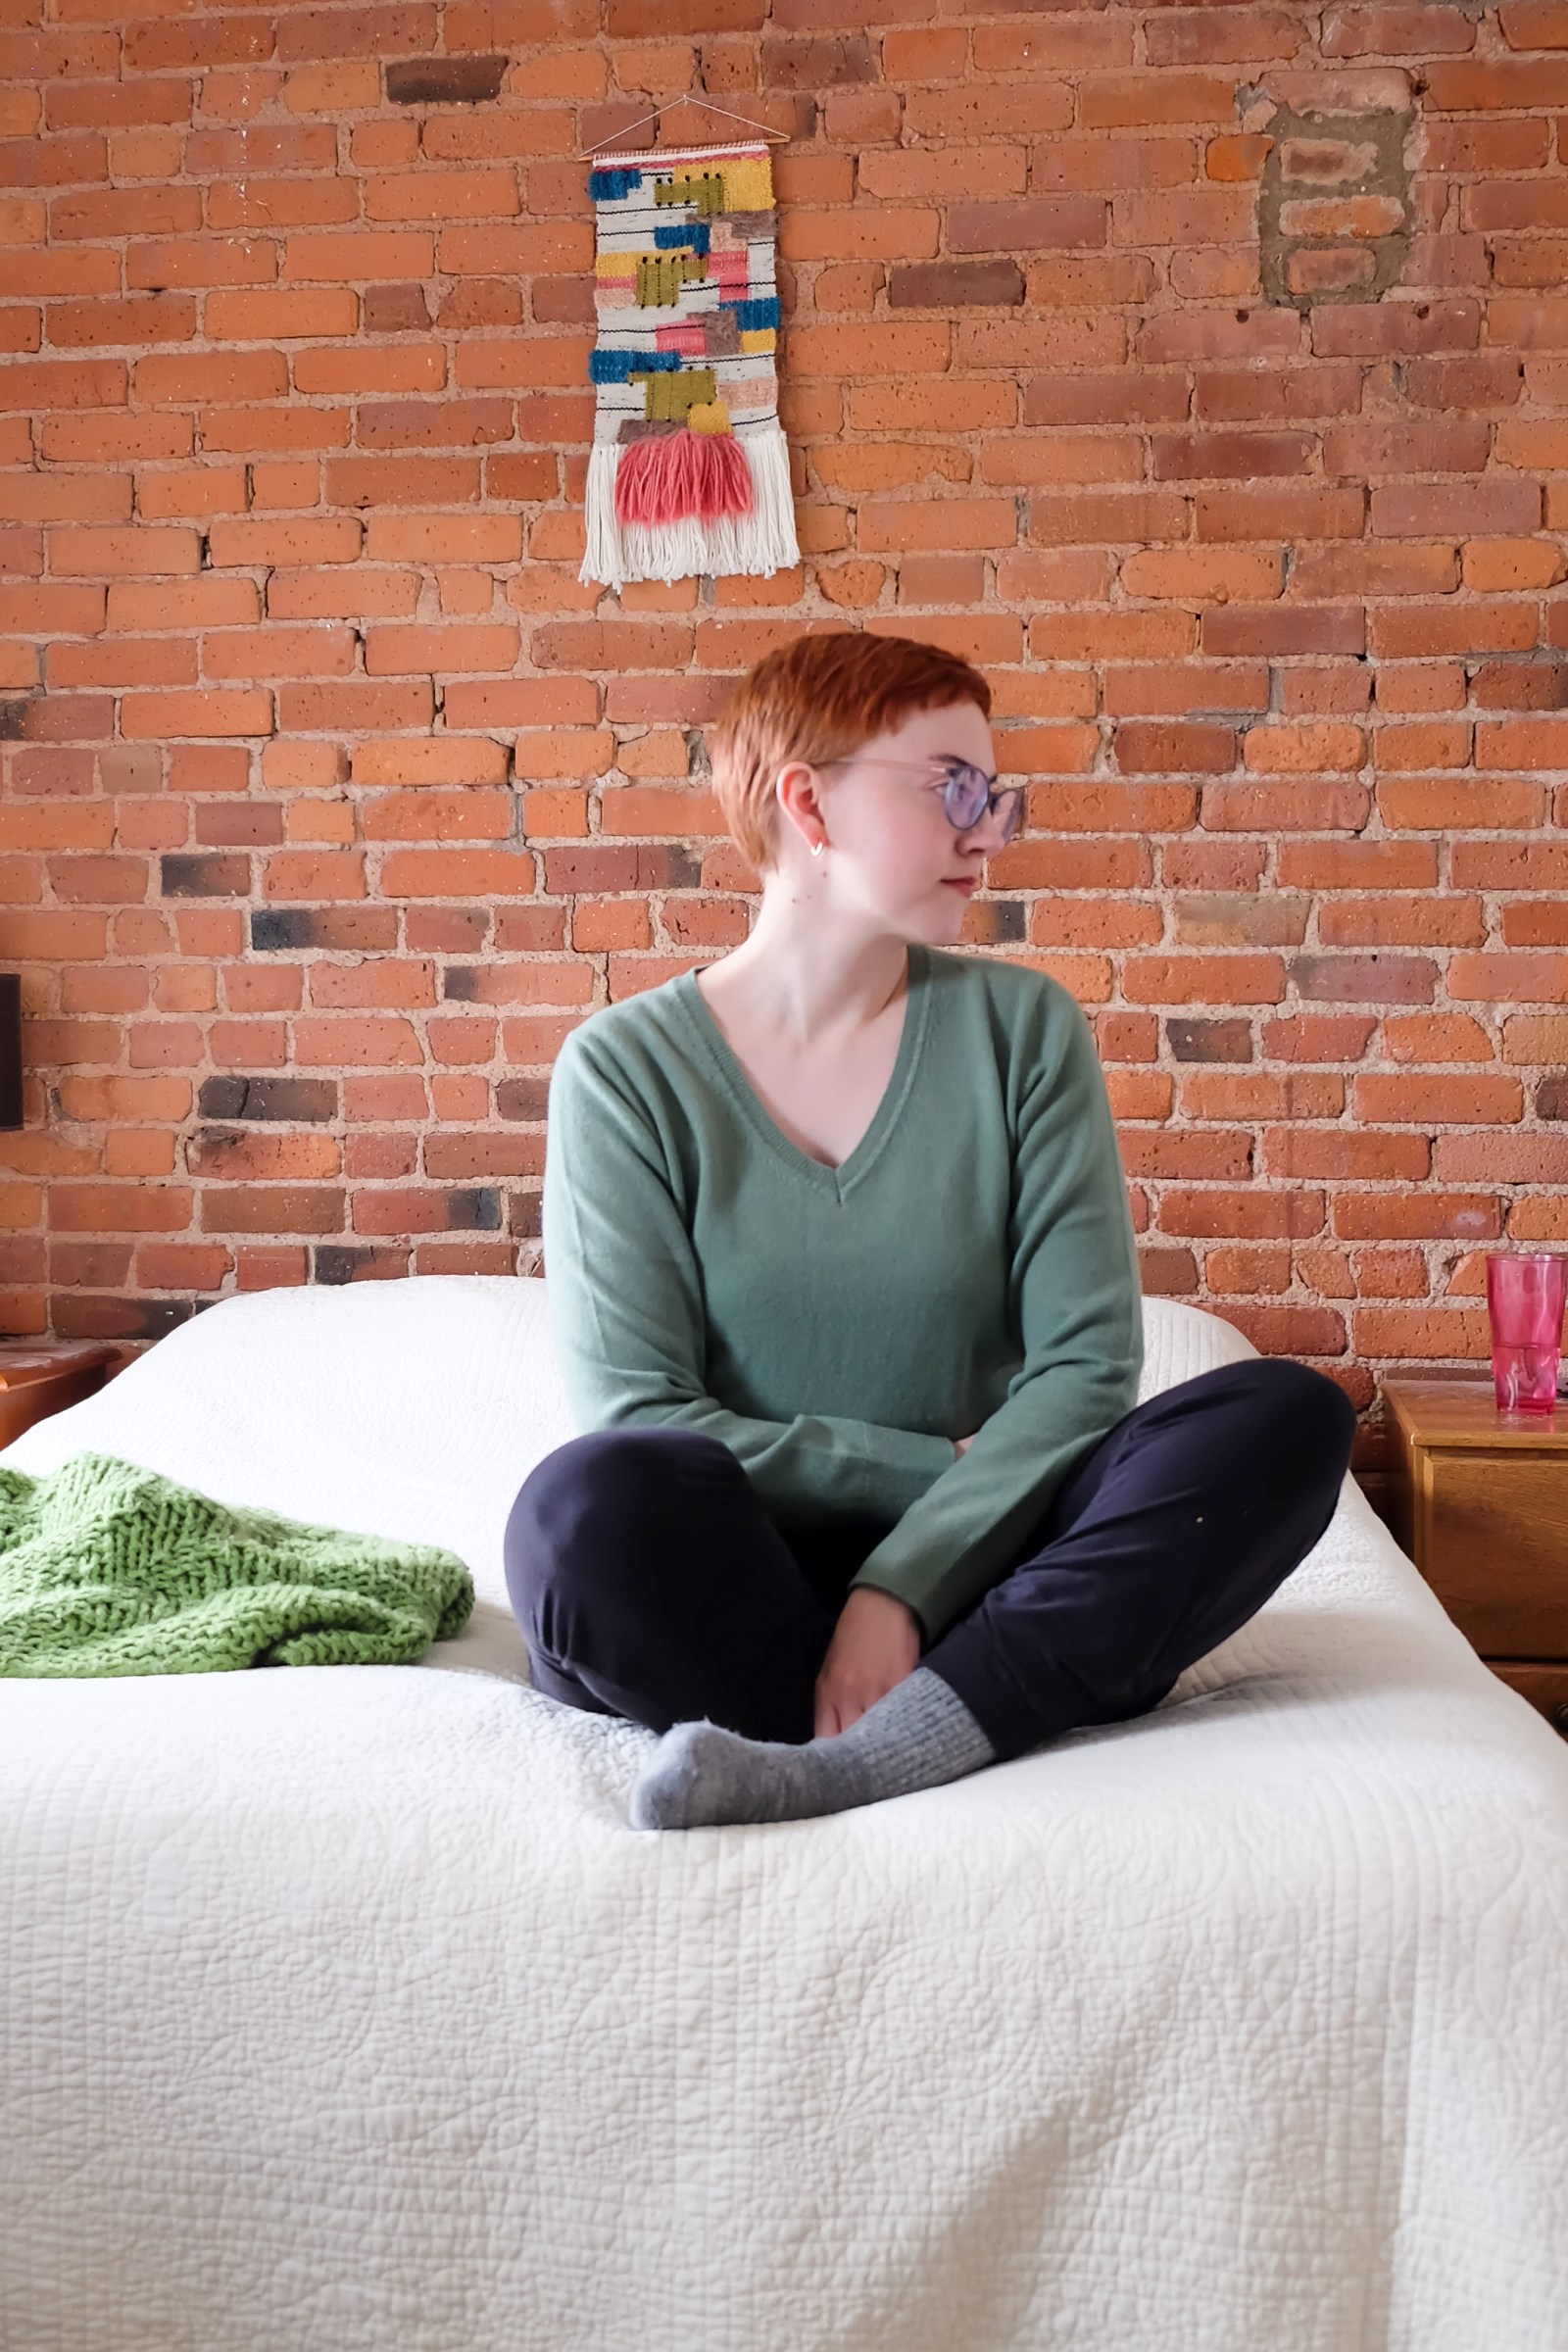 pixie cut using clippers - Leah sits on bed with white quilt wearing green sweater